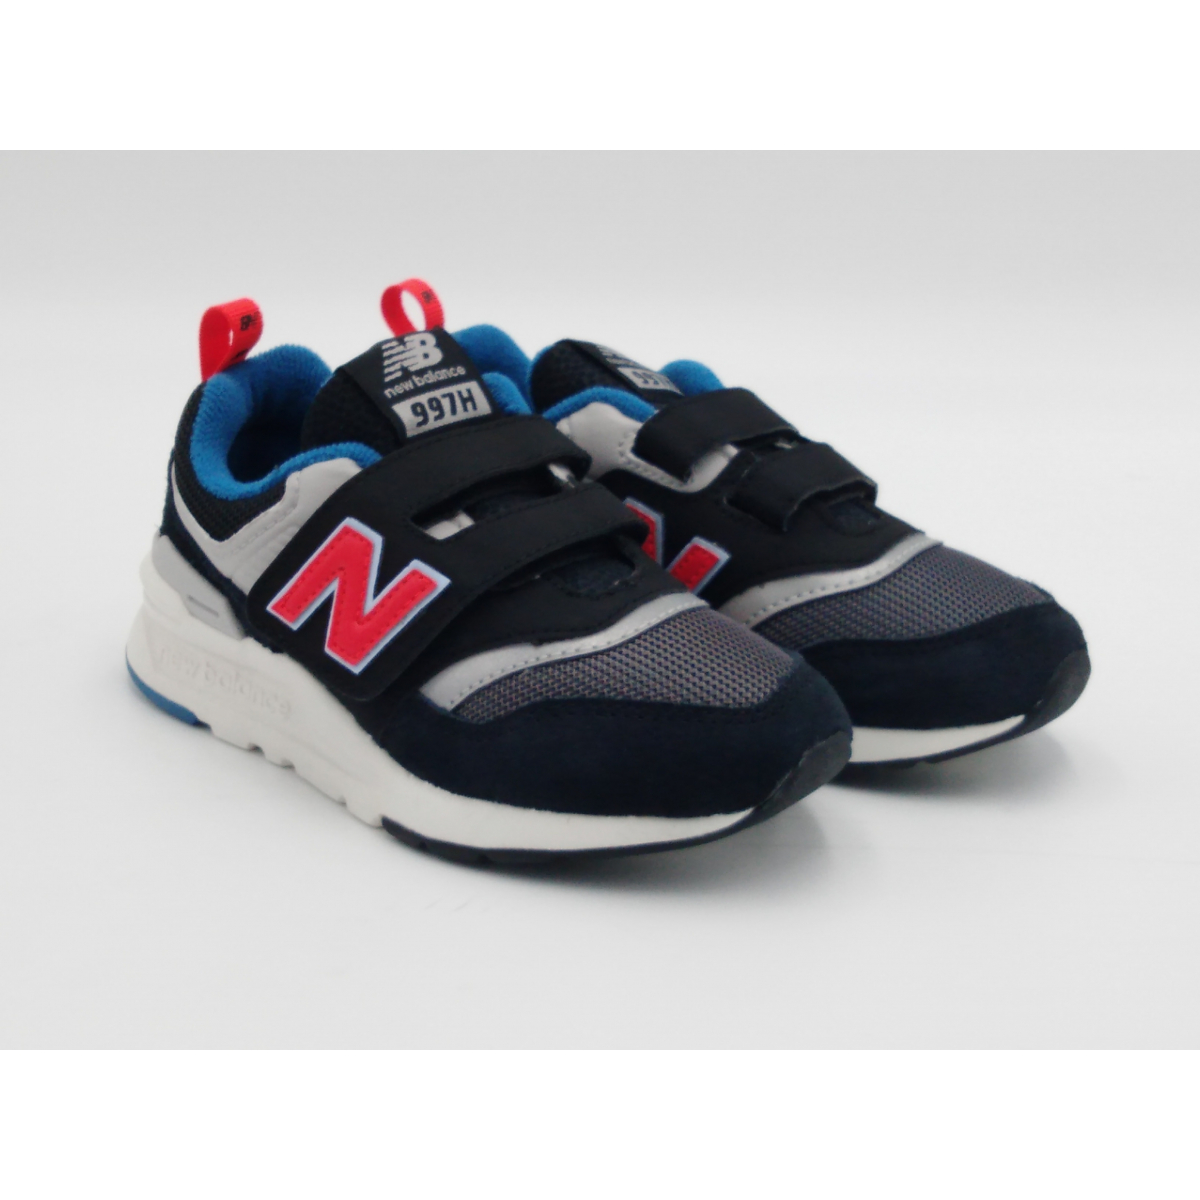 new balance con strappo buy clothes shoes online